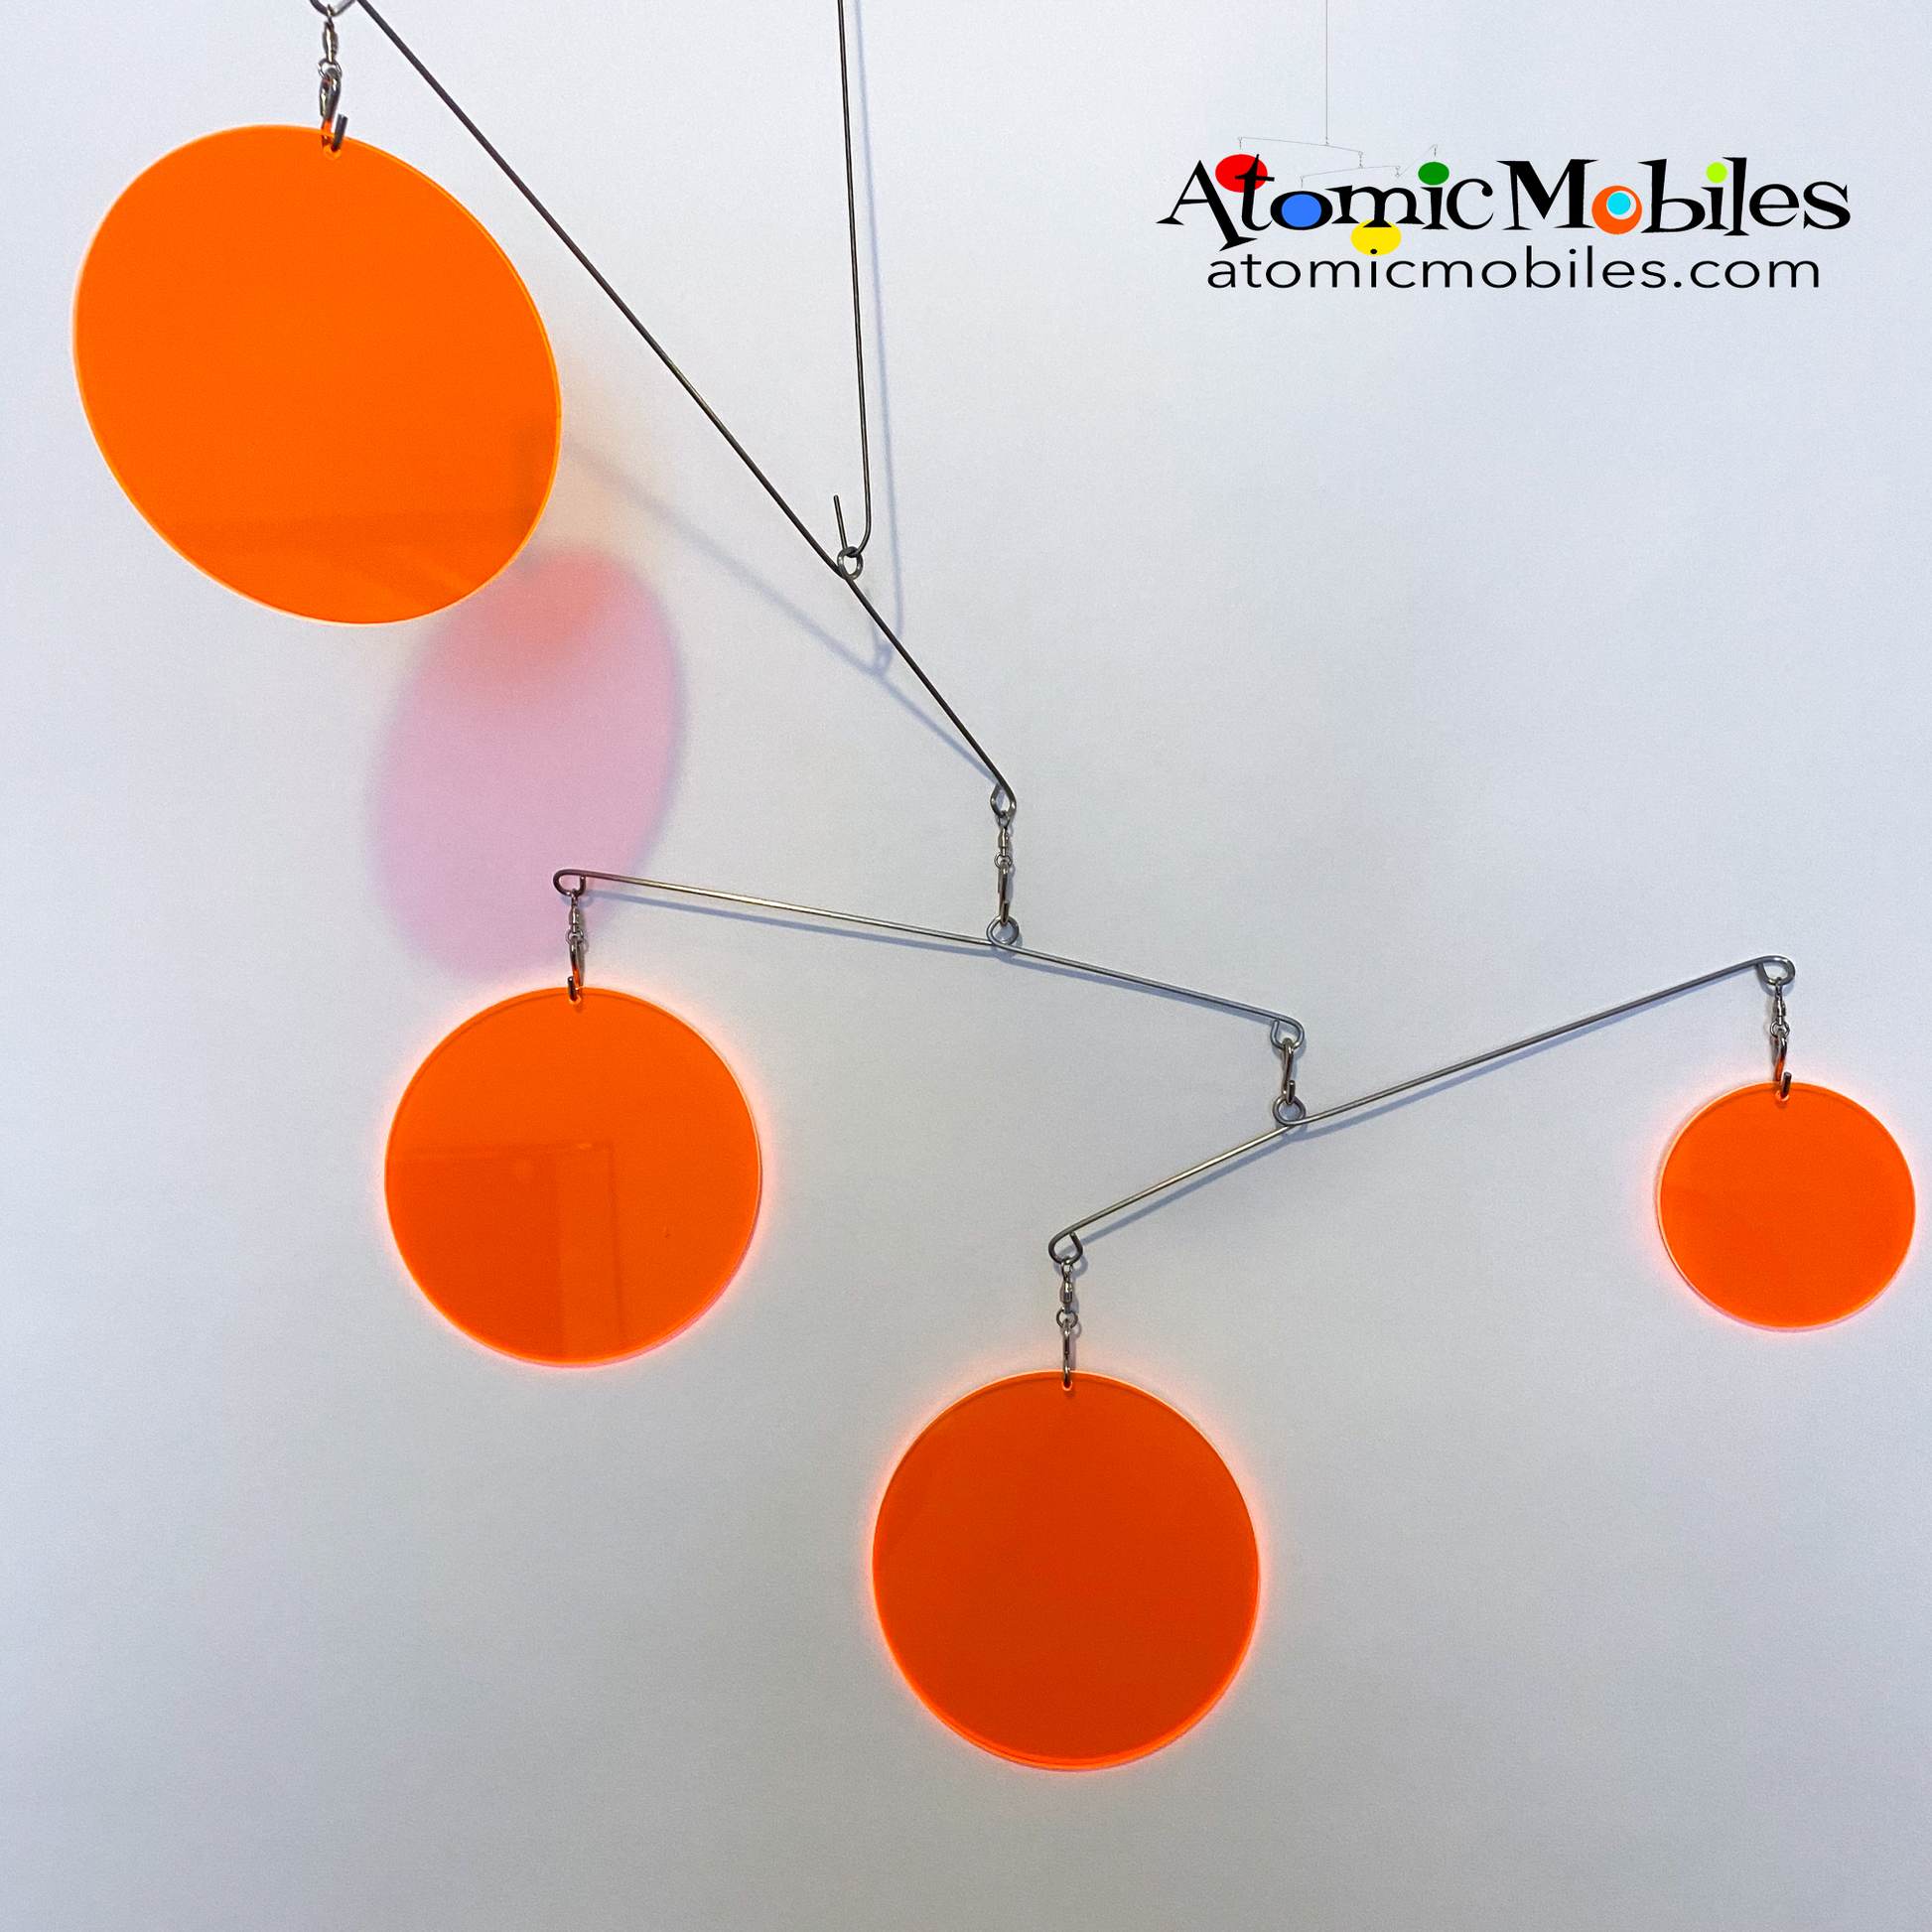 Neon Fluorescent Orange Atomic Mobile -  hanging modern kinetic art mobiles by AtomicMobiles.com